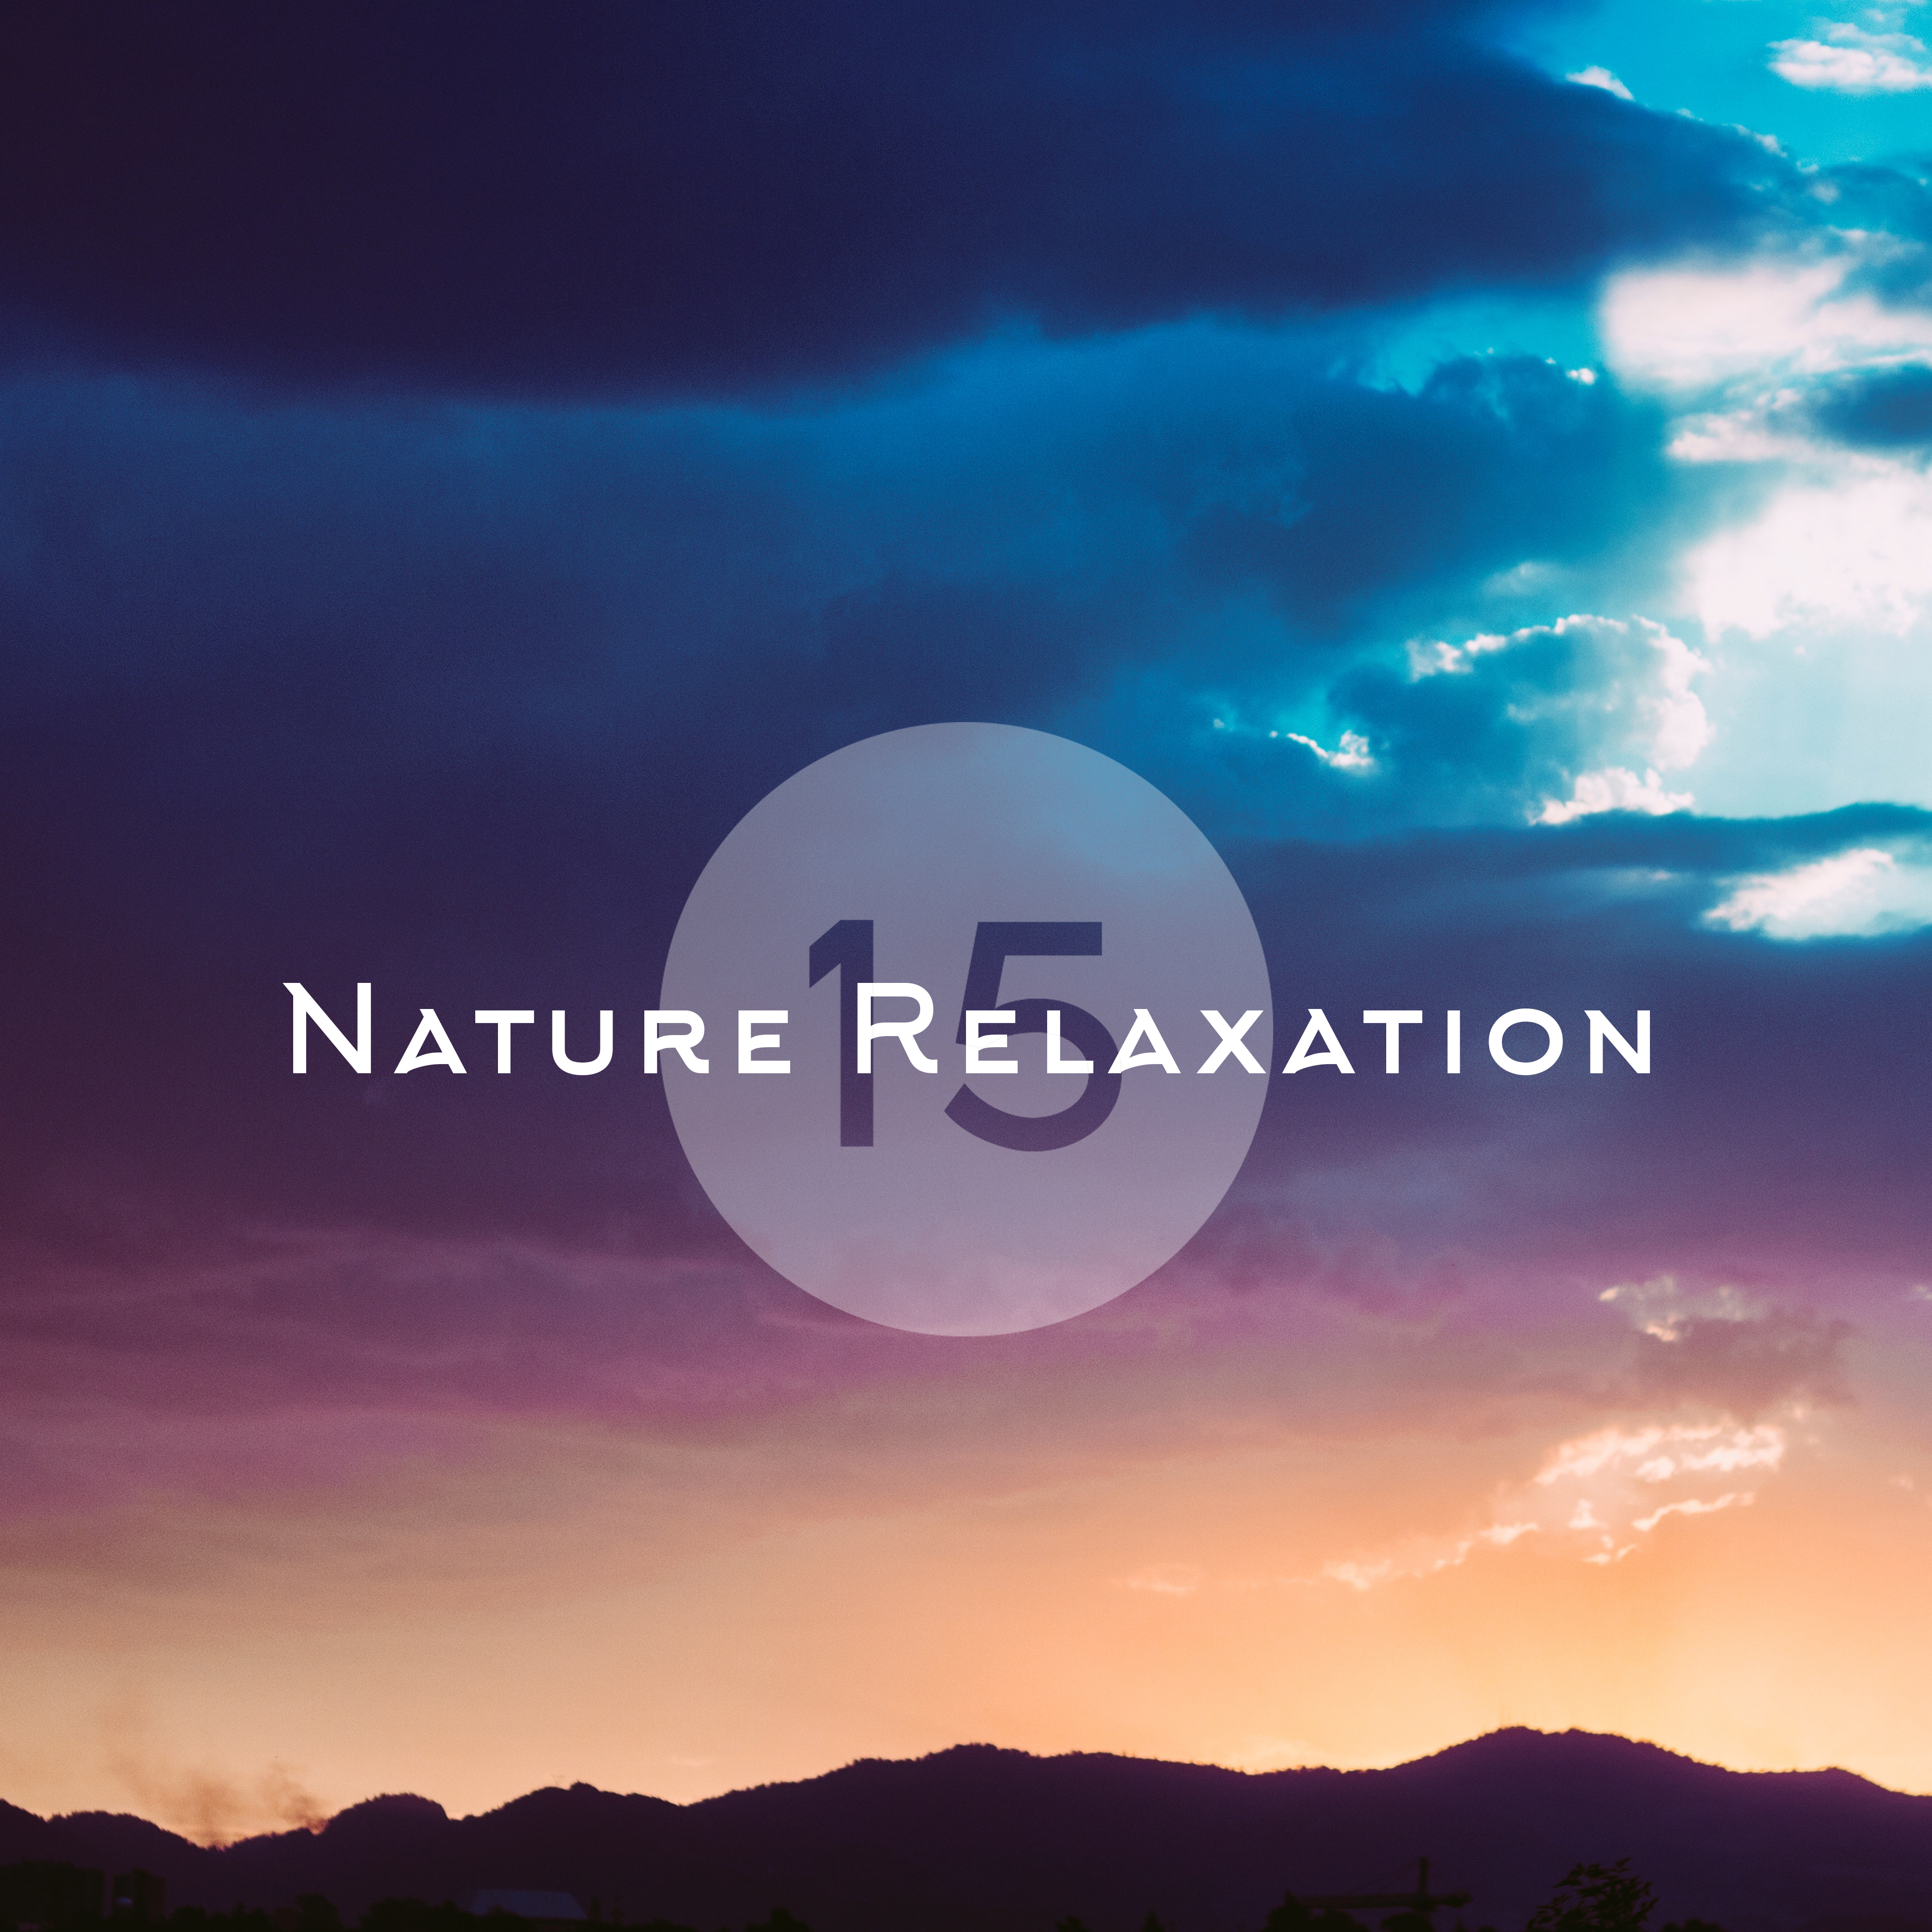 15 Nature Relaxation